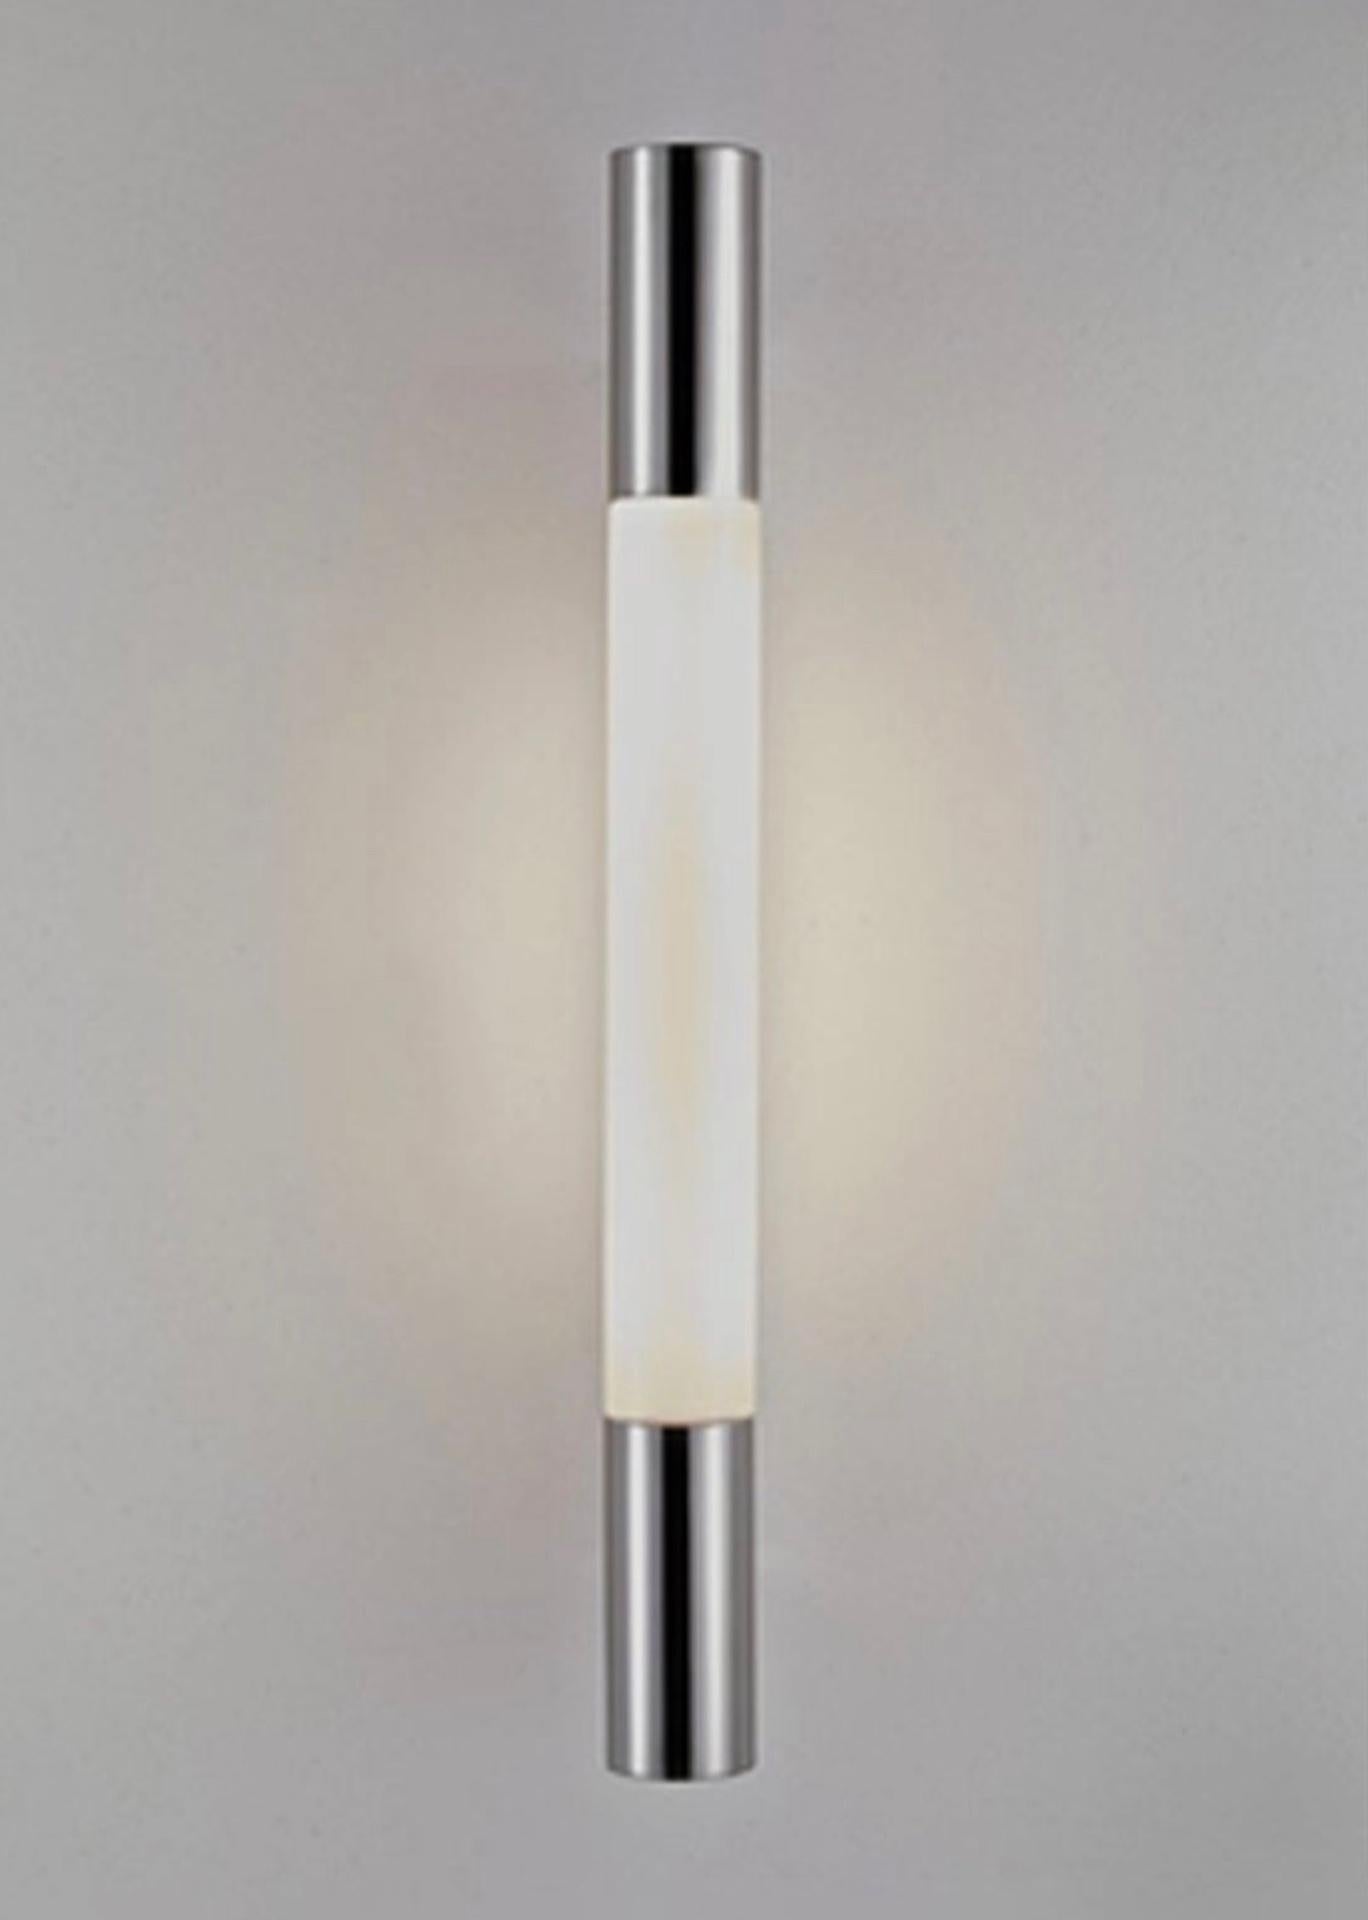 This sophisticated wall lamp is ideal for mirrors, staircases and hallways. It can only be mounted in an upright position with two matt stainless-steel cylinders at each end. Its special plastic diffuser ensures a very even distribution of light